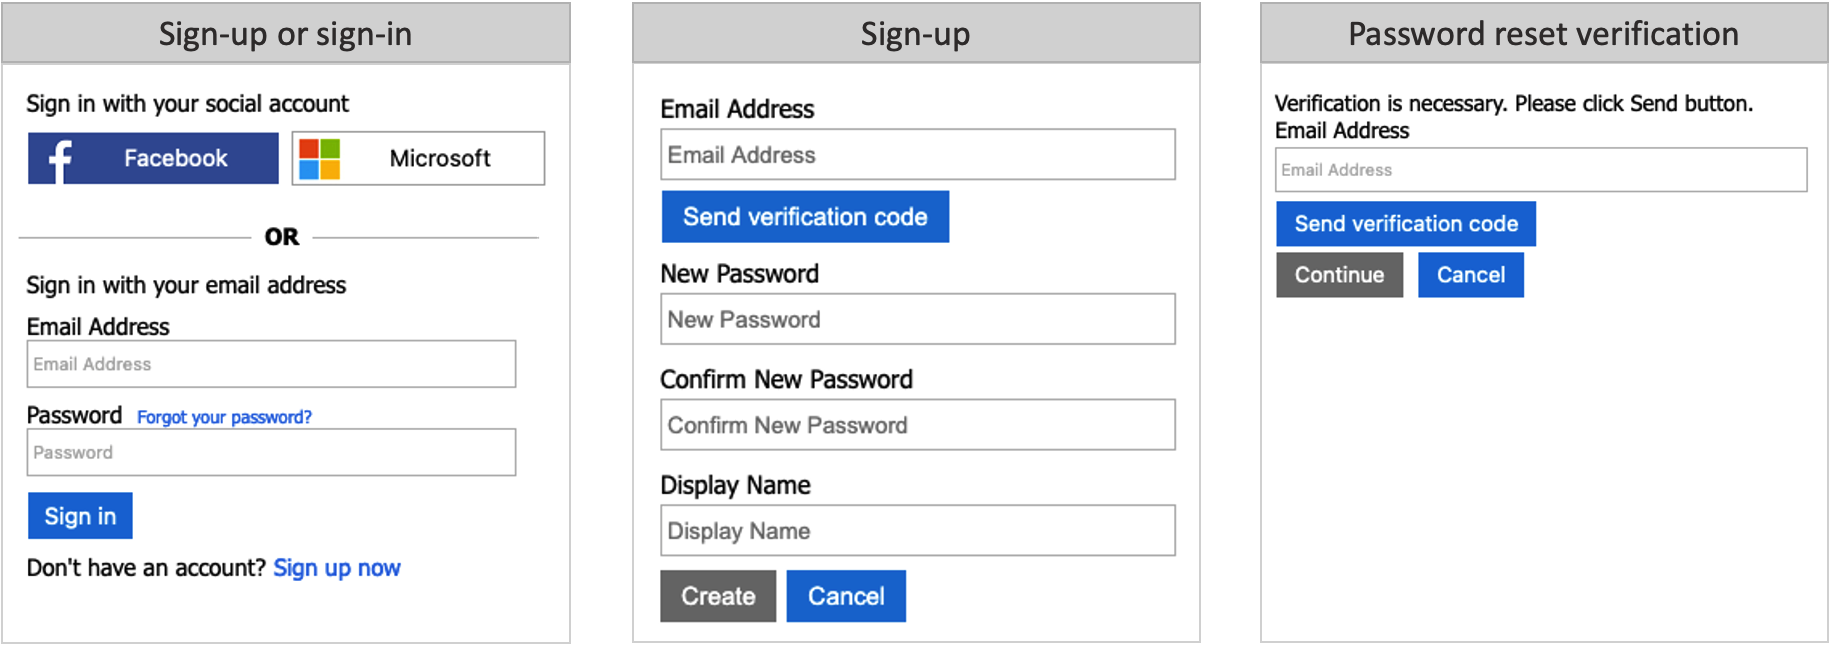 Email sign-up or sign-in experience